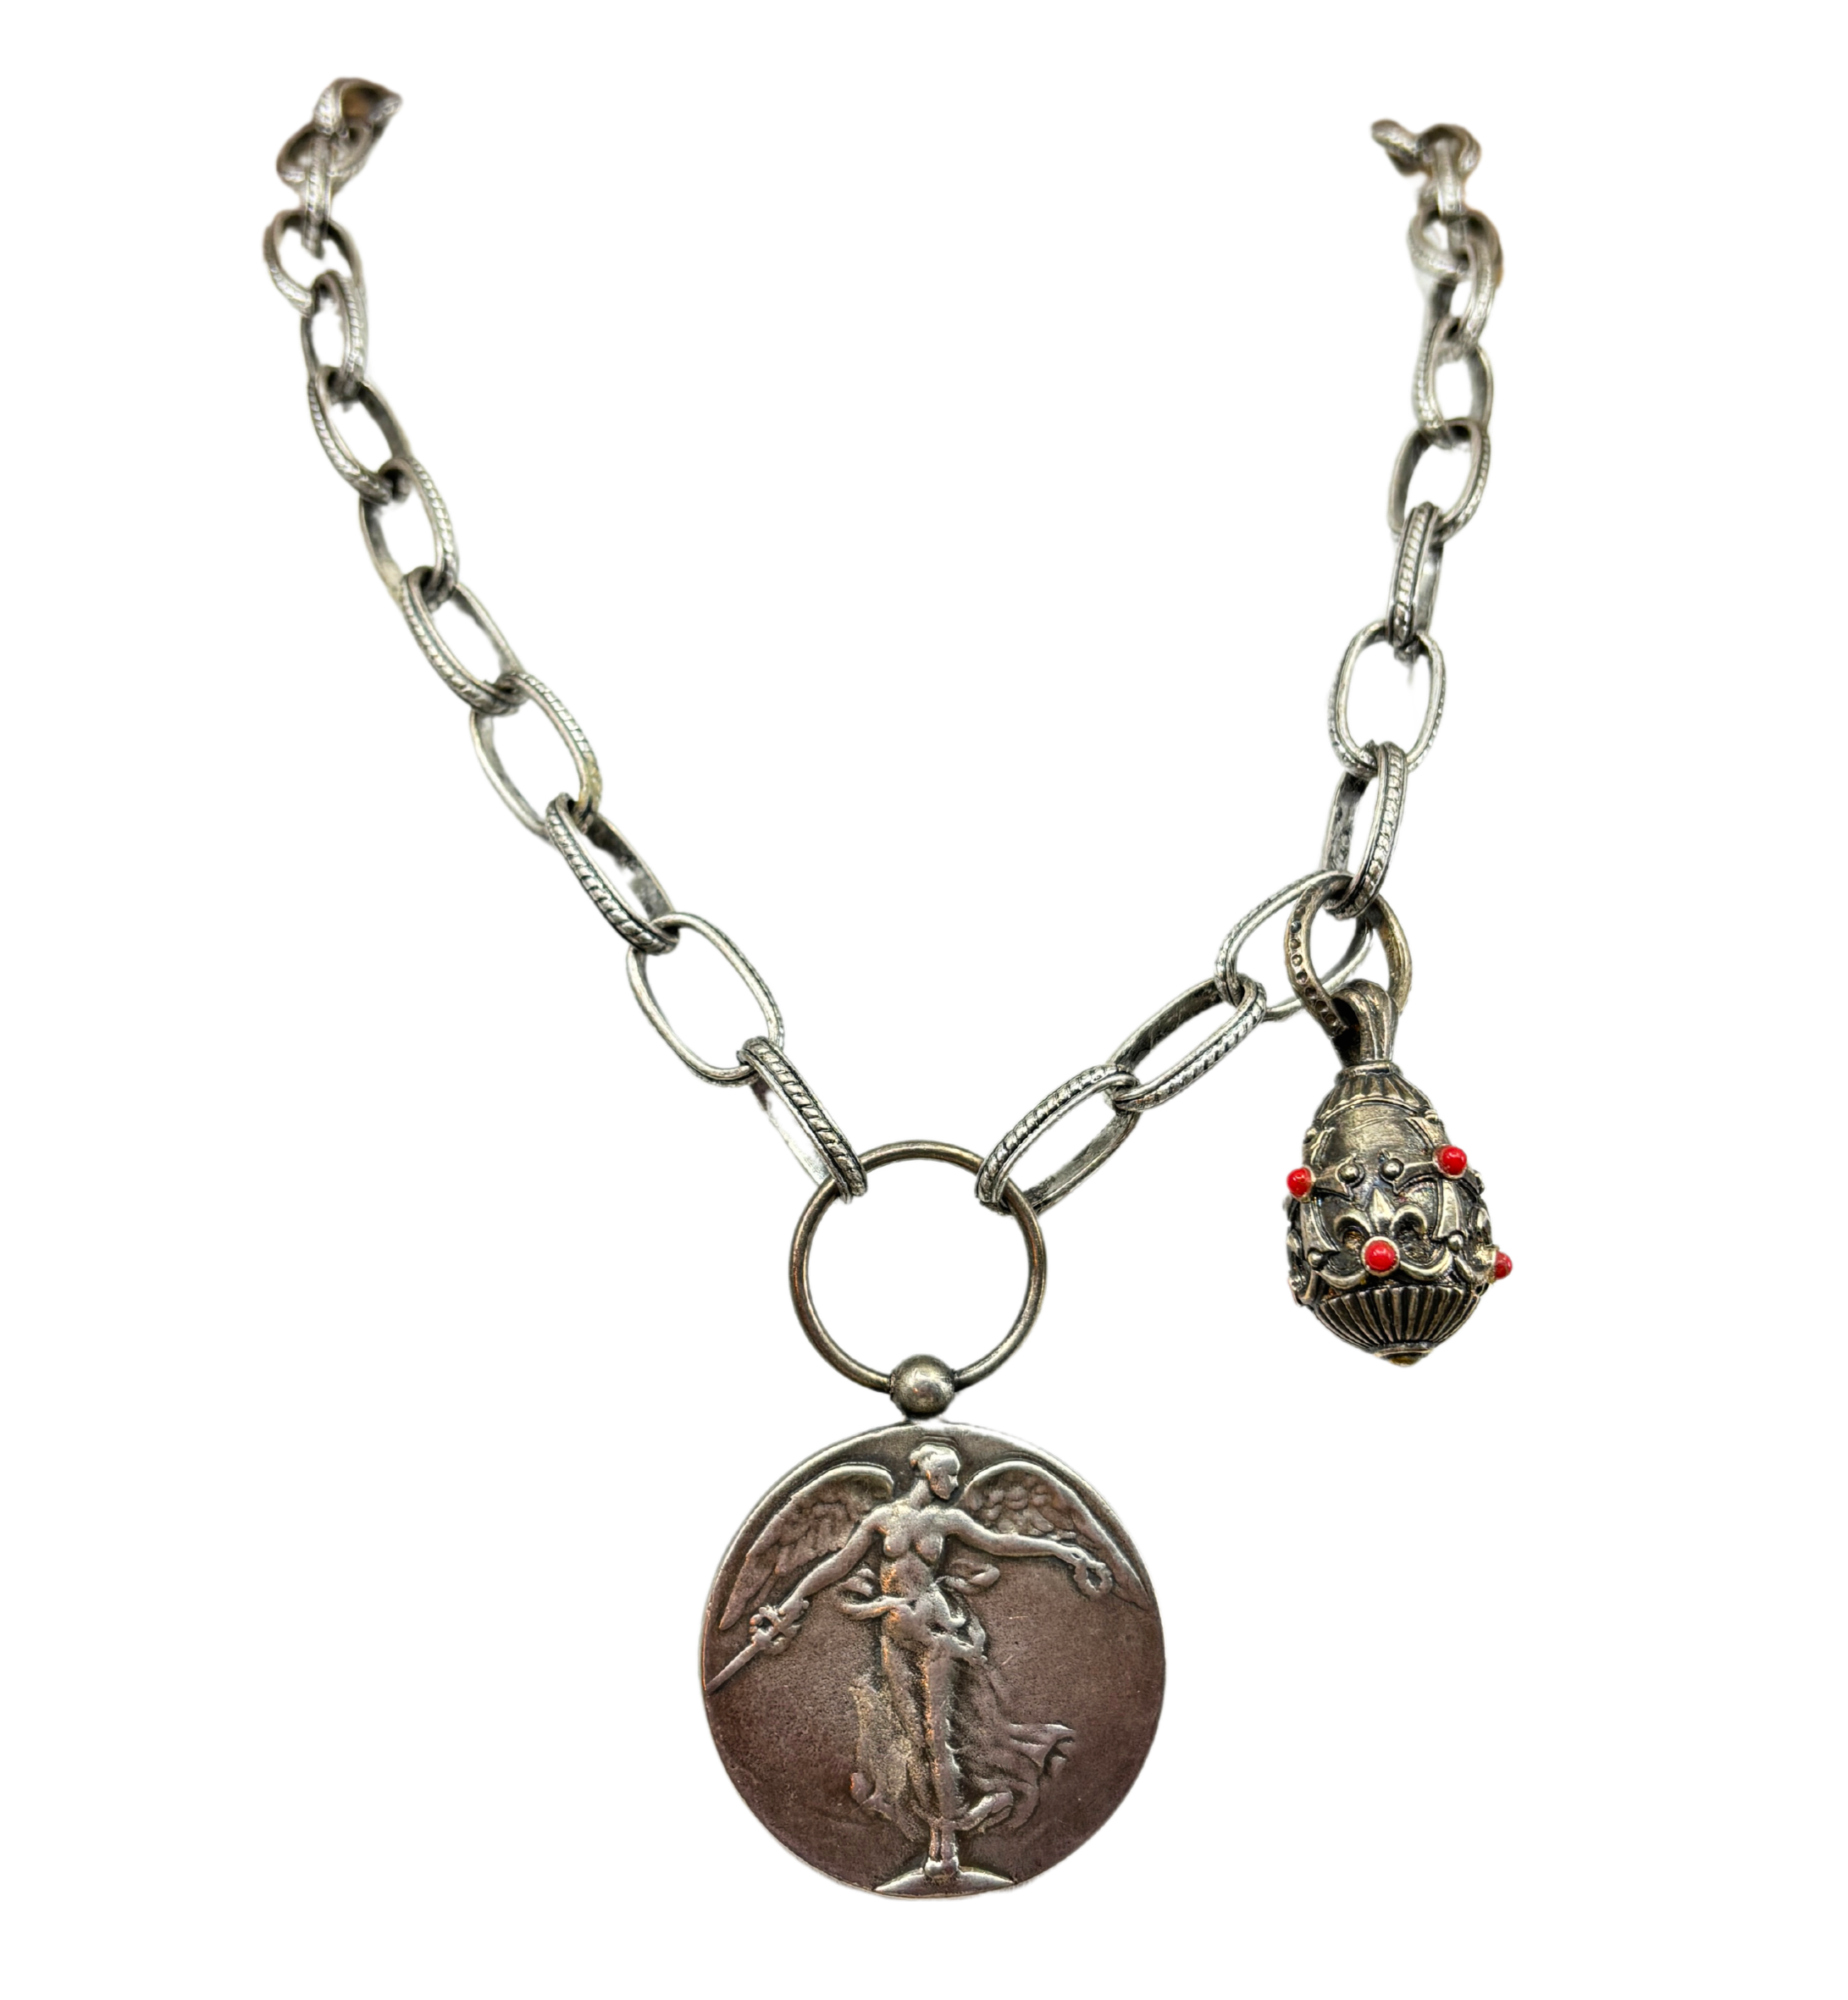 Sterling Plated Faberge Egg & Victory Medal Necklace